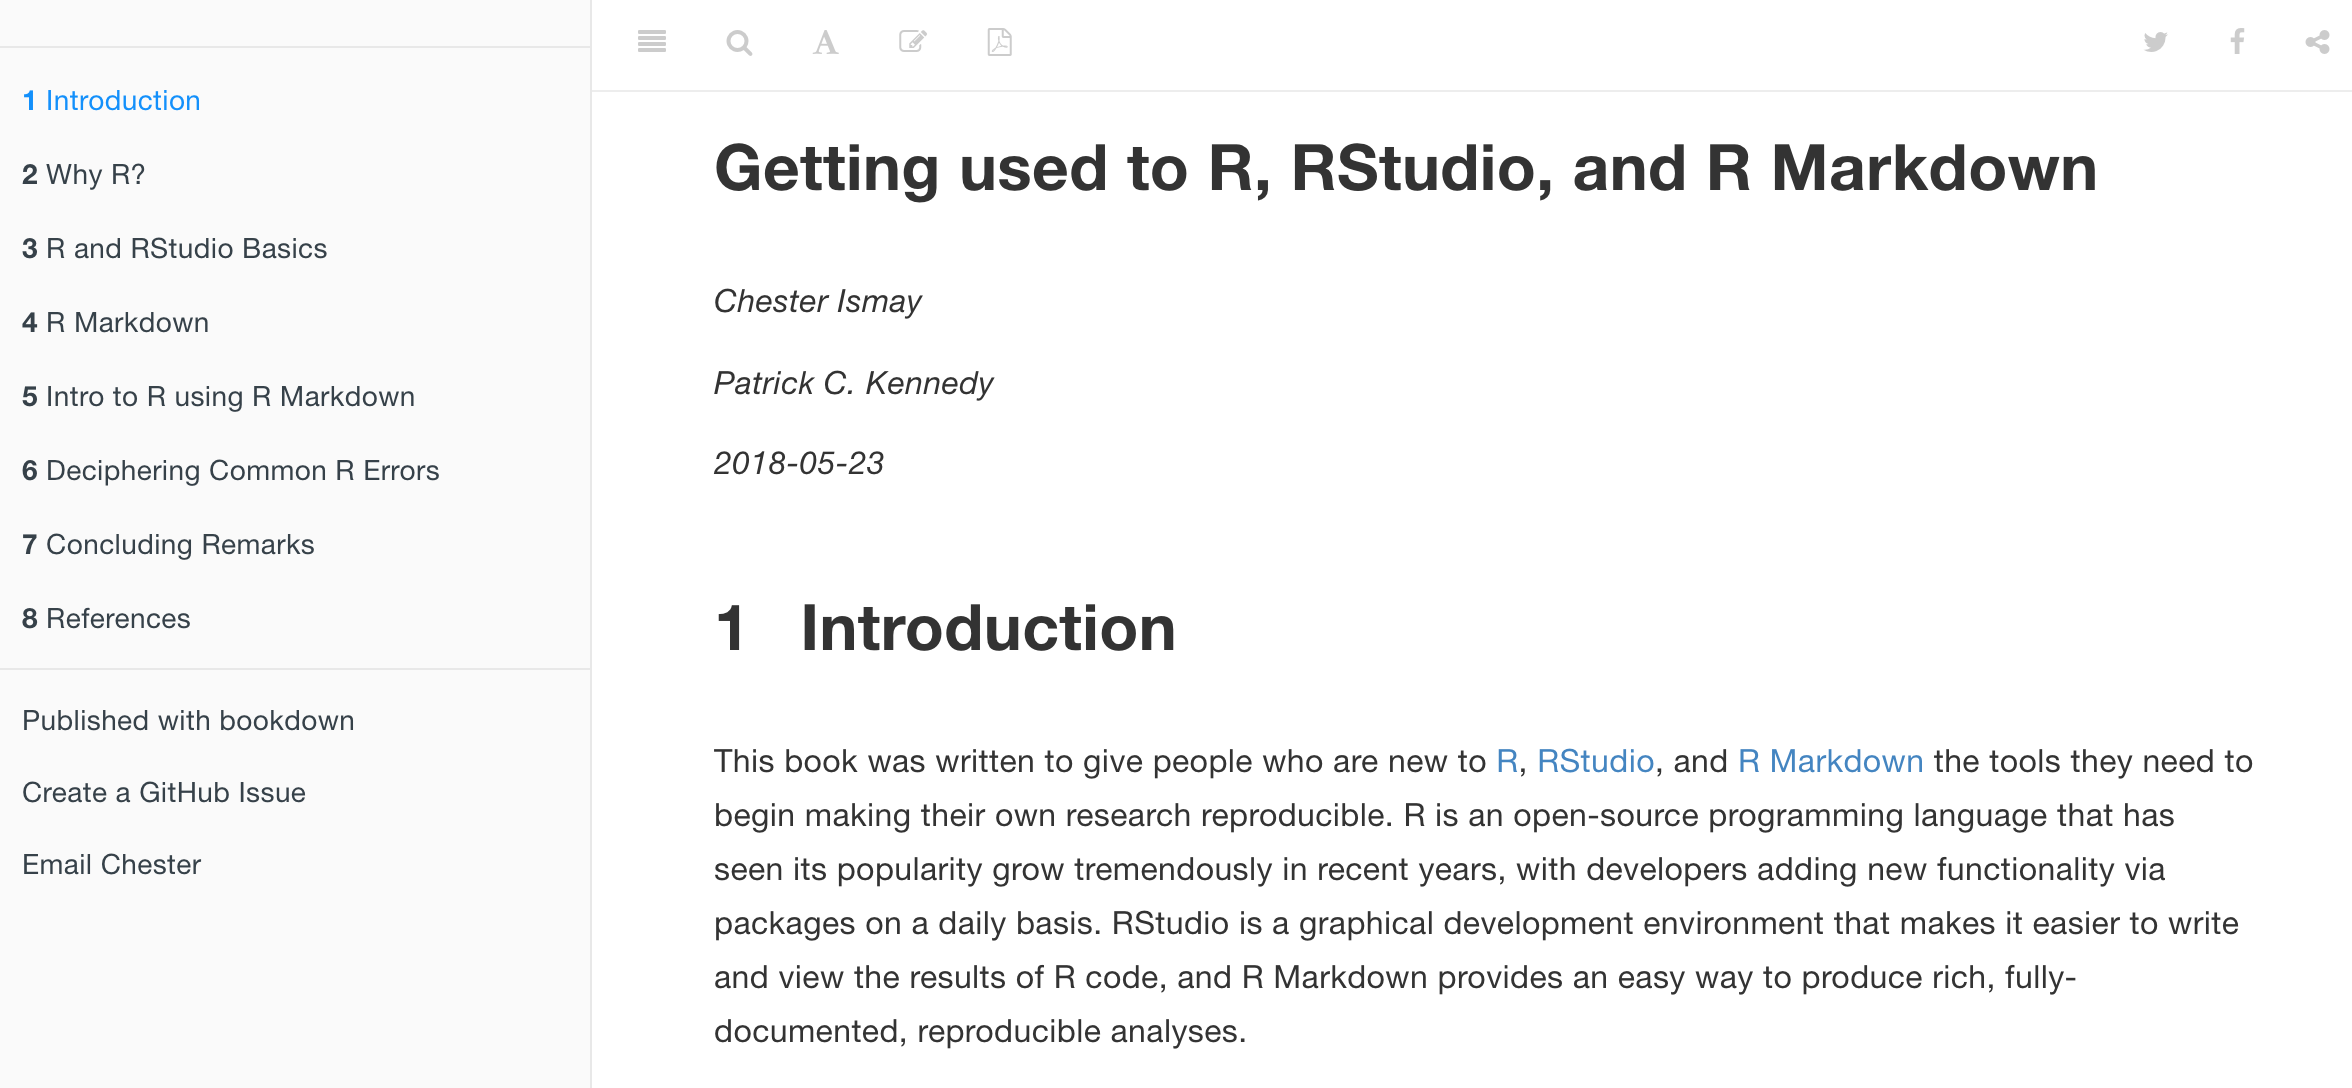 Preview of Getting used to R, RStudio, and R Markdown book.